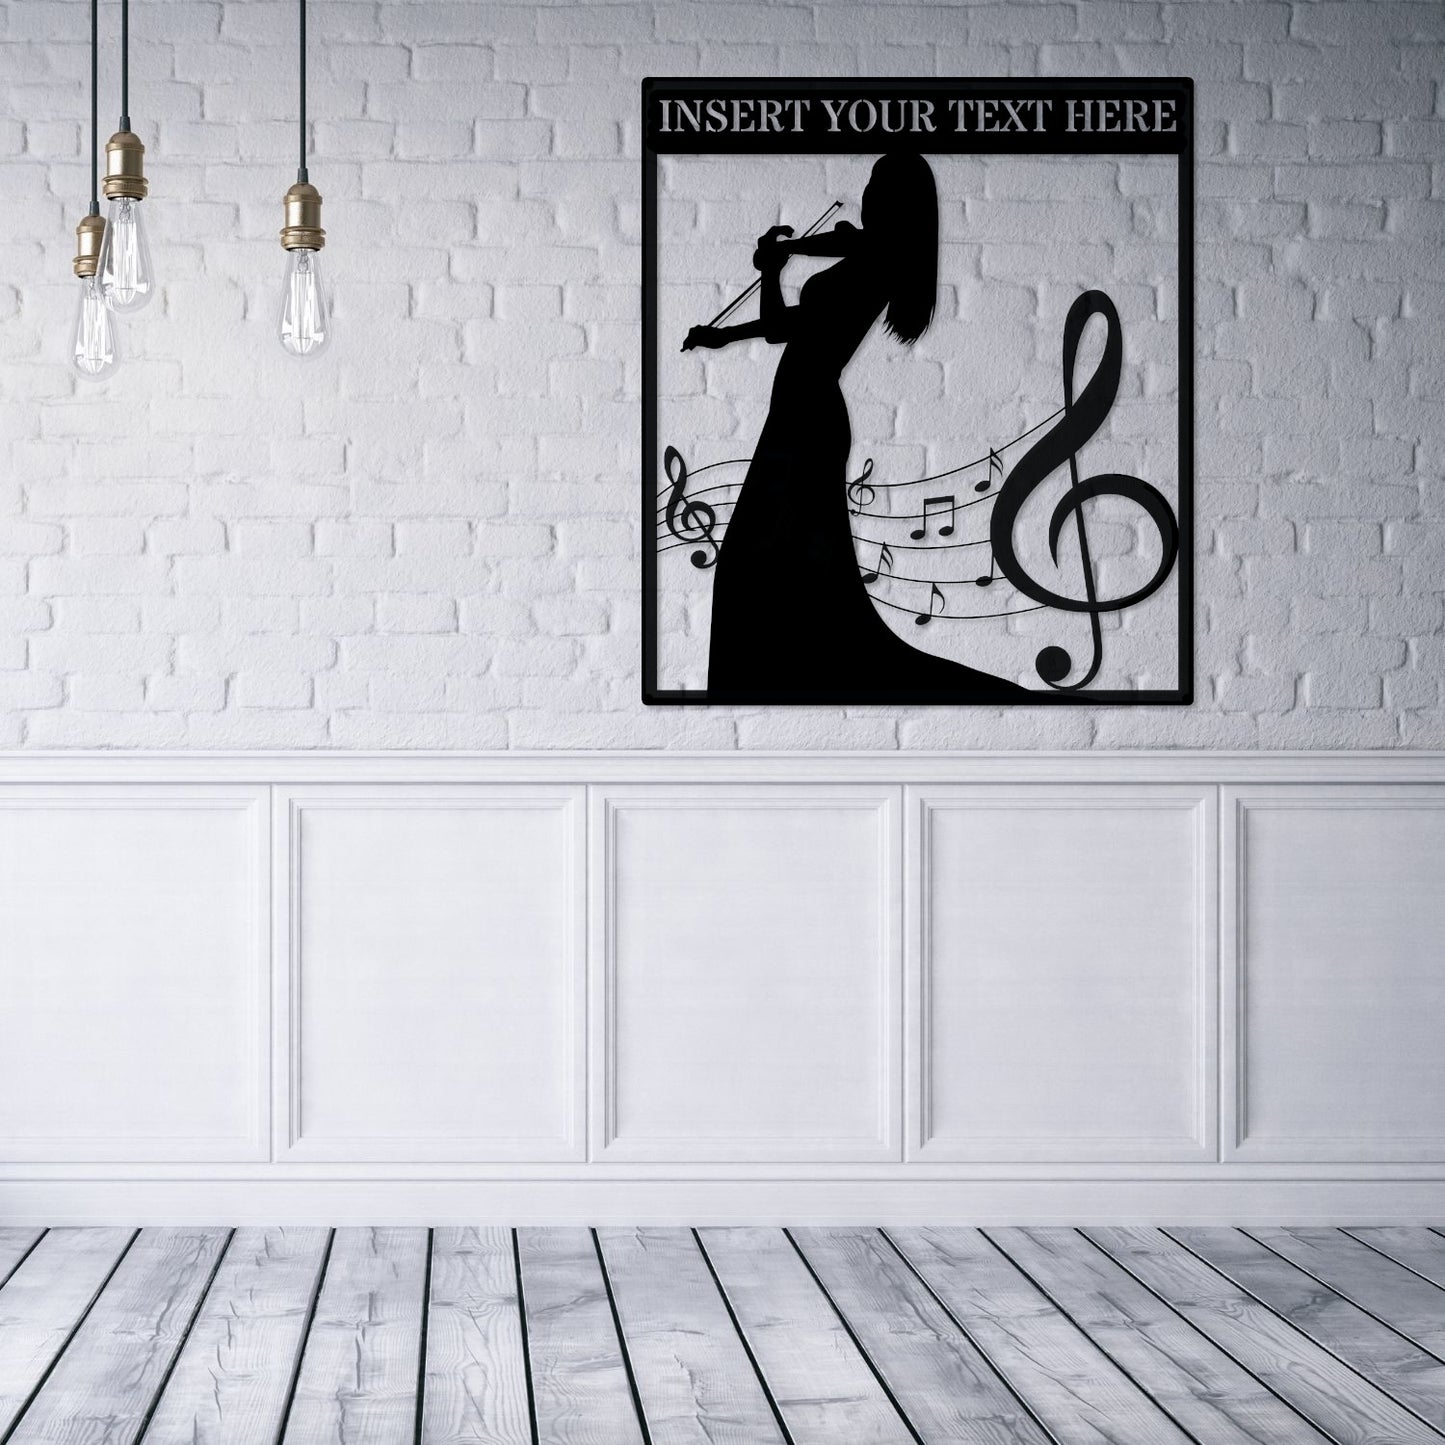 Personalized Female Violin Player Metal Sign. Custom Violinist Name Wall Decor. Music Room Decoration. Musician Wall Hanging. Violin Lover